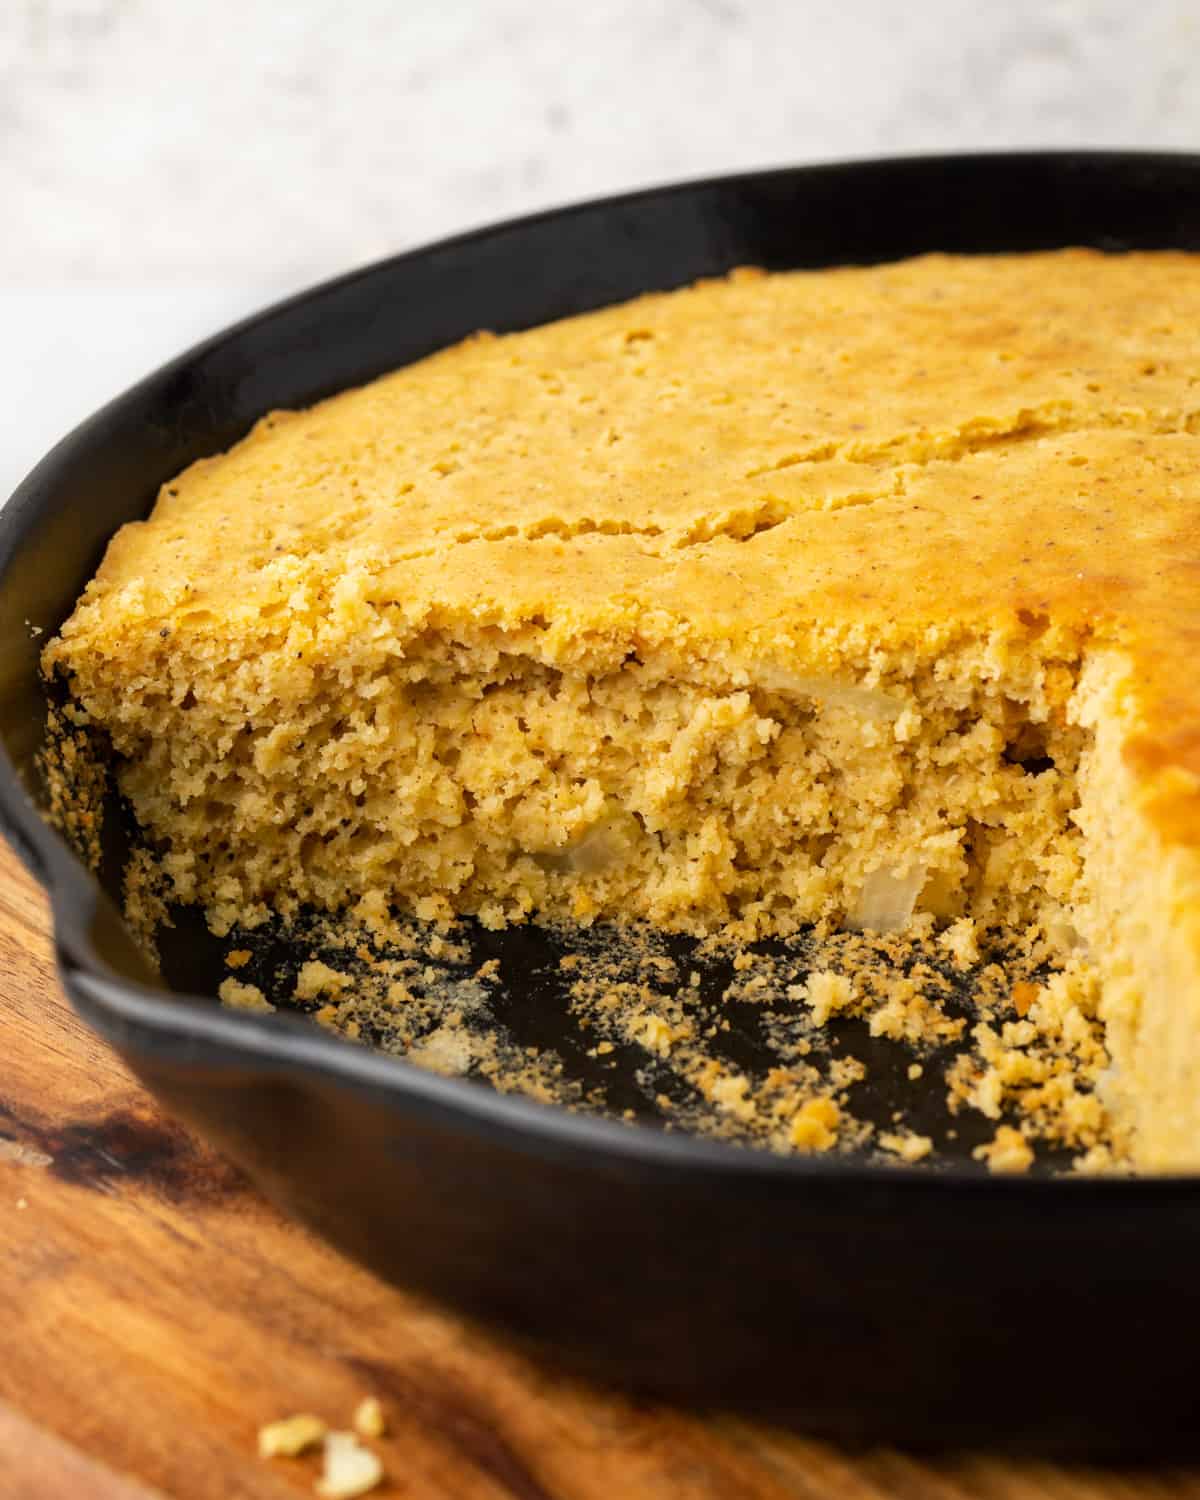 A sliced batch of cornbread in a cast iron skillet.